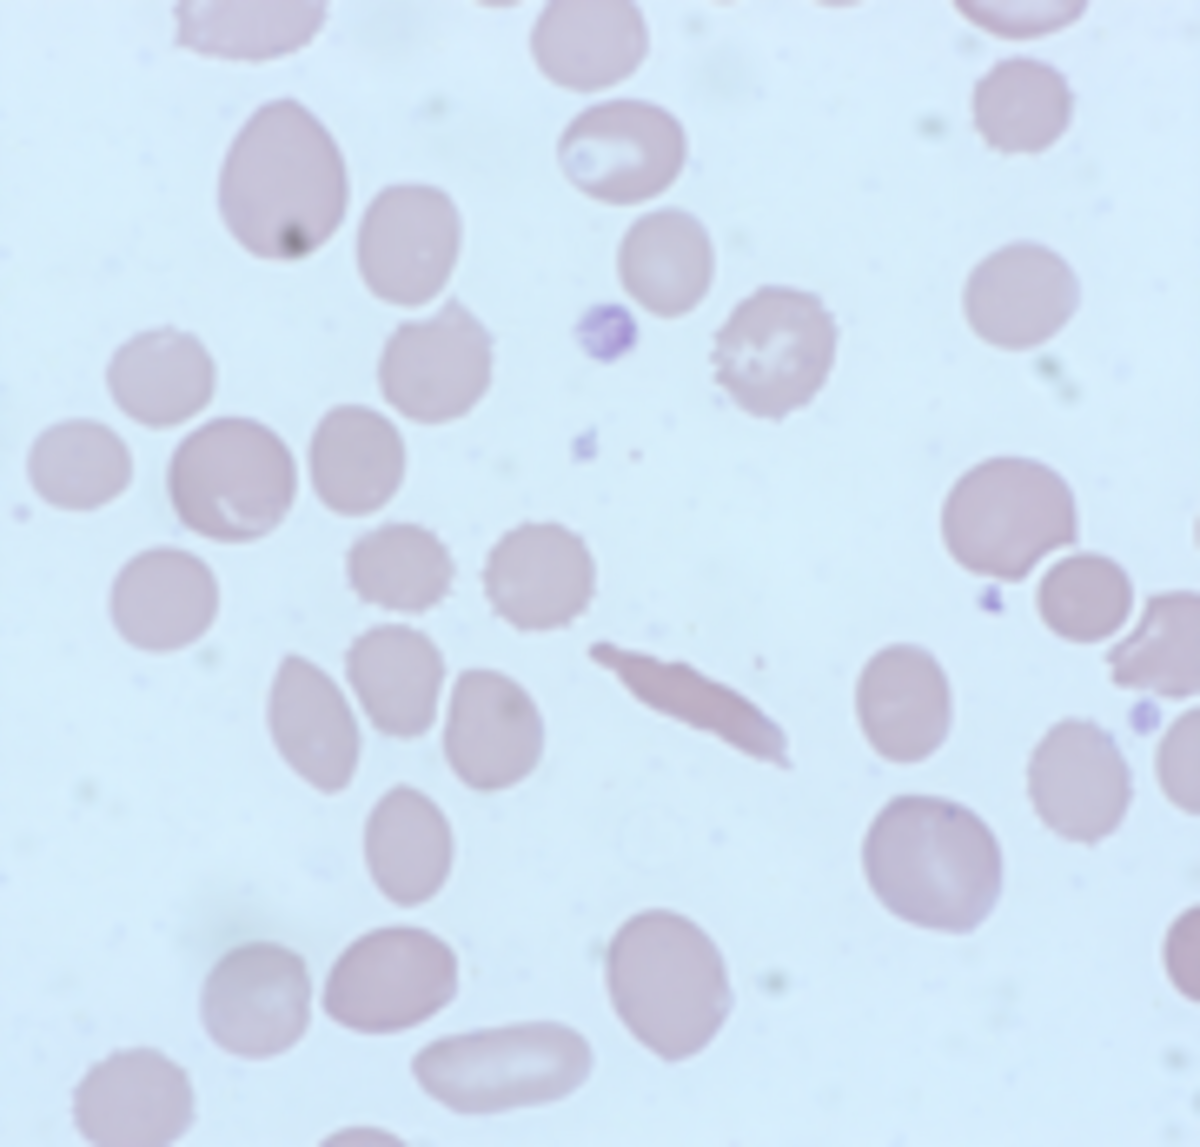 Lab CE Course - Erythrocyte Inclusions Flashcards | Quizlet